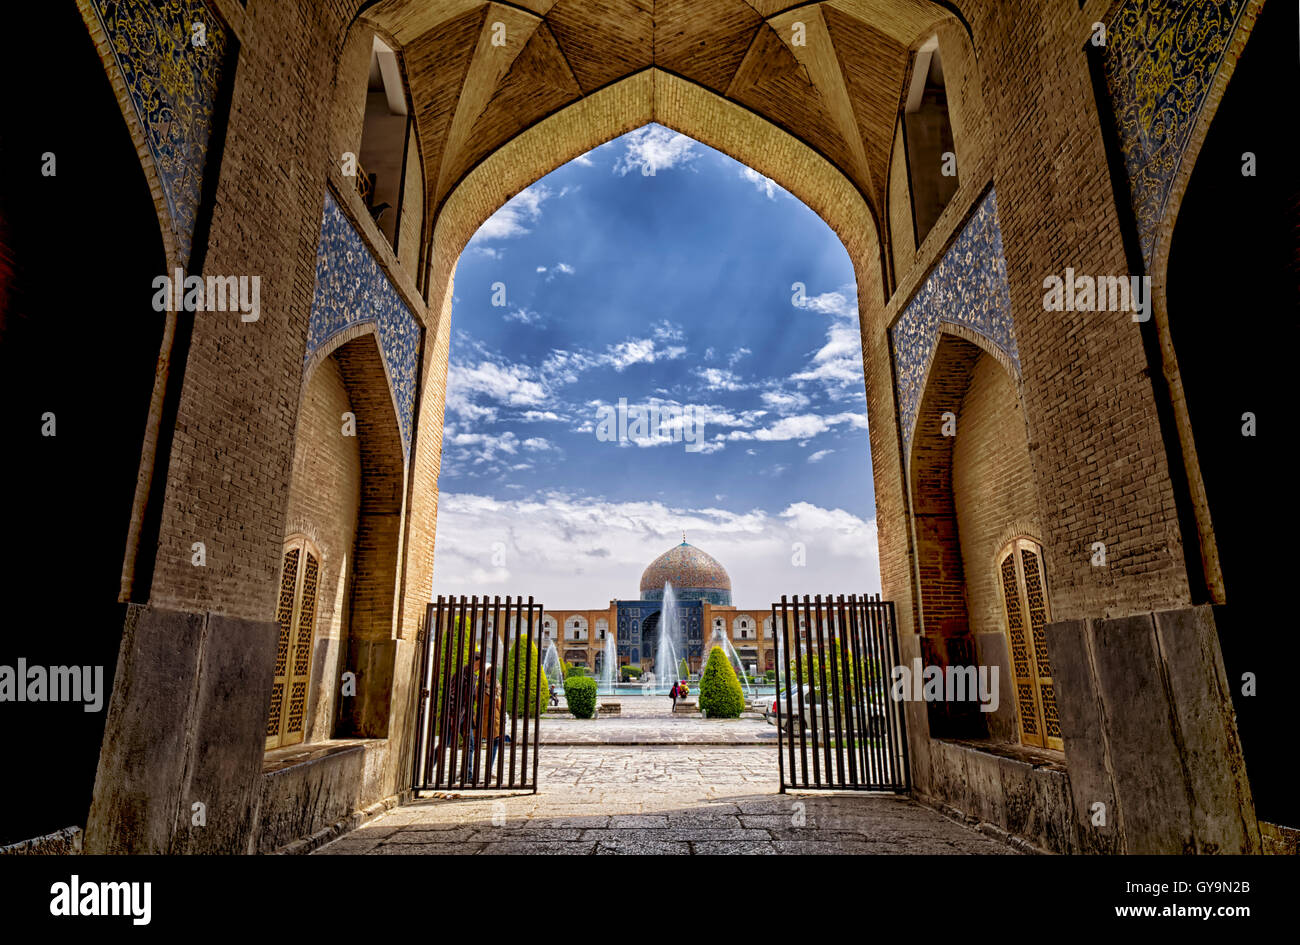 Welcome to Naqsh-e Jahan Square Stock Photo